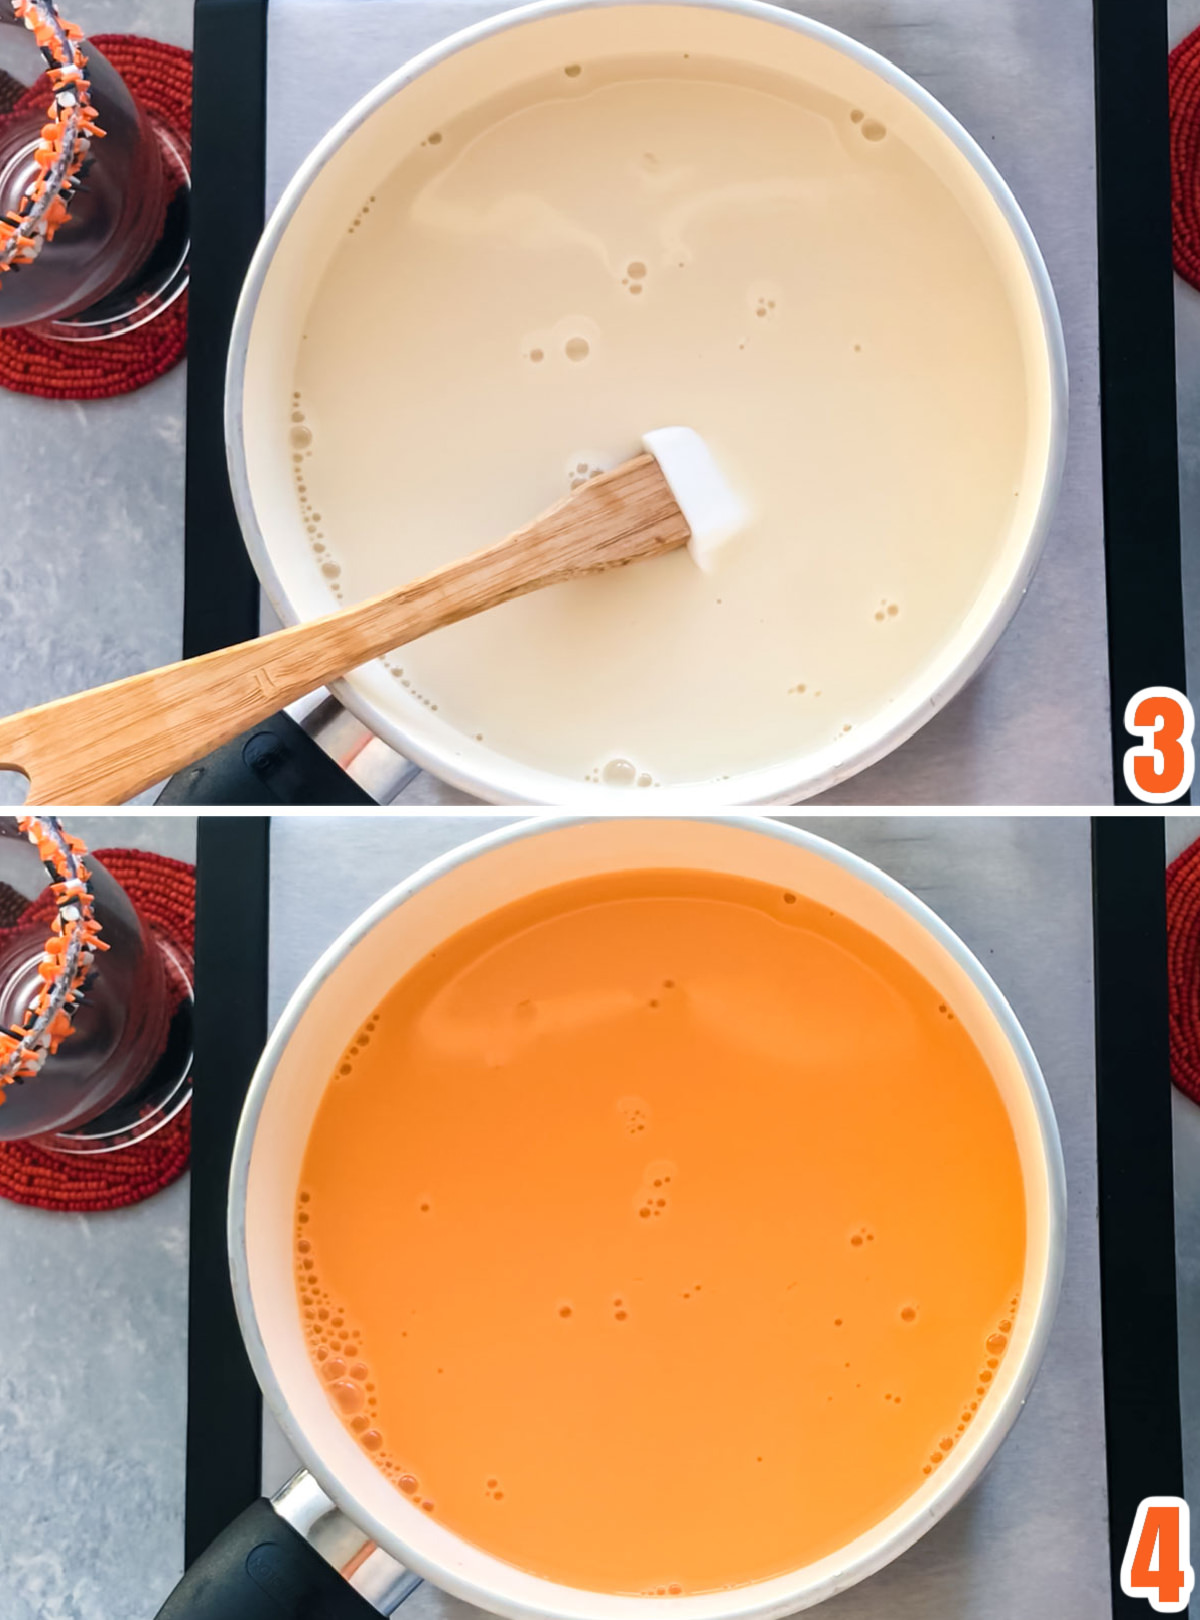 Collage image showing the steps for making Hot Vanilla Milk.